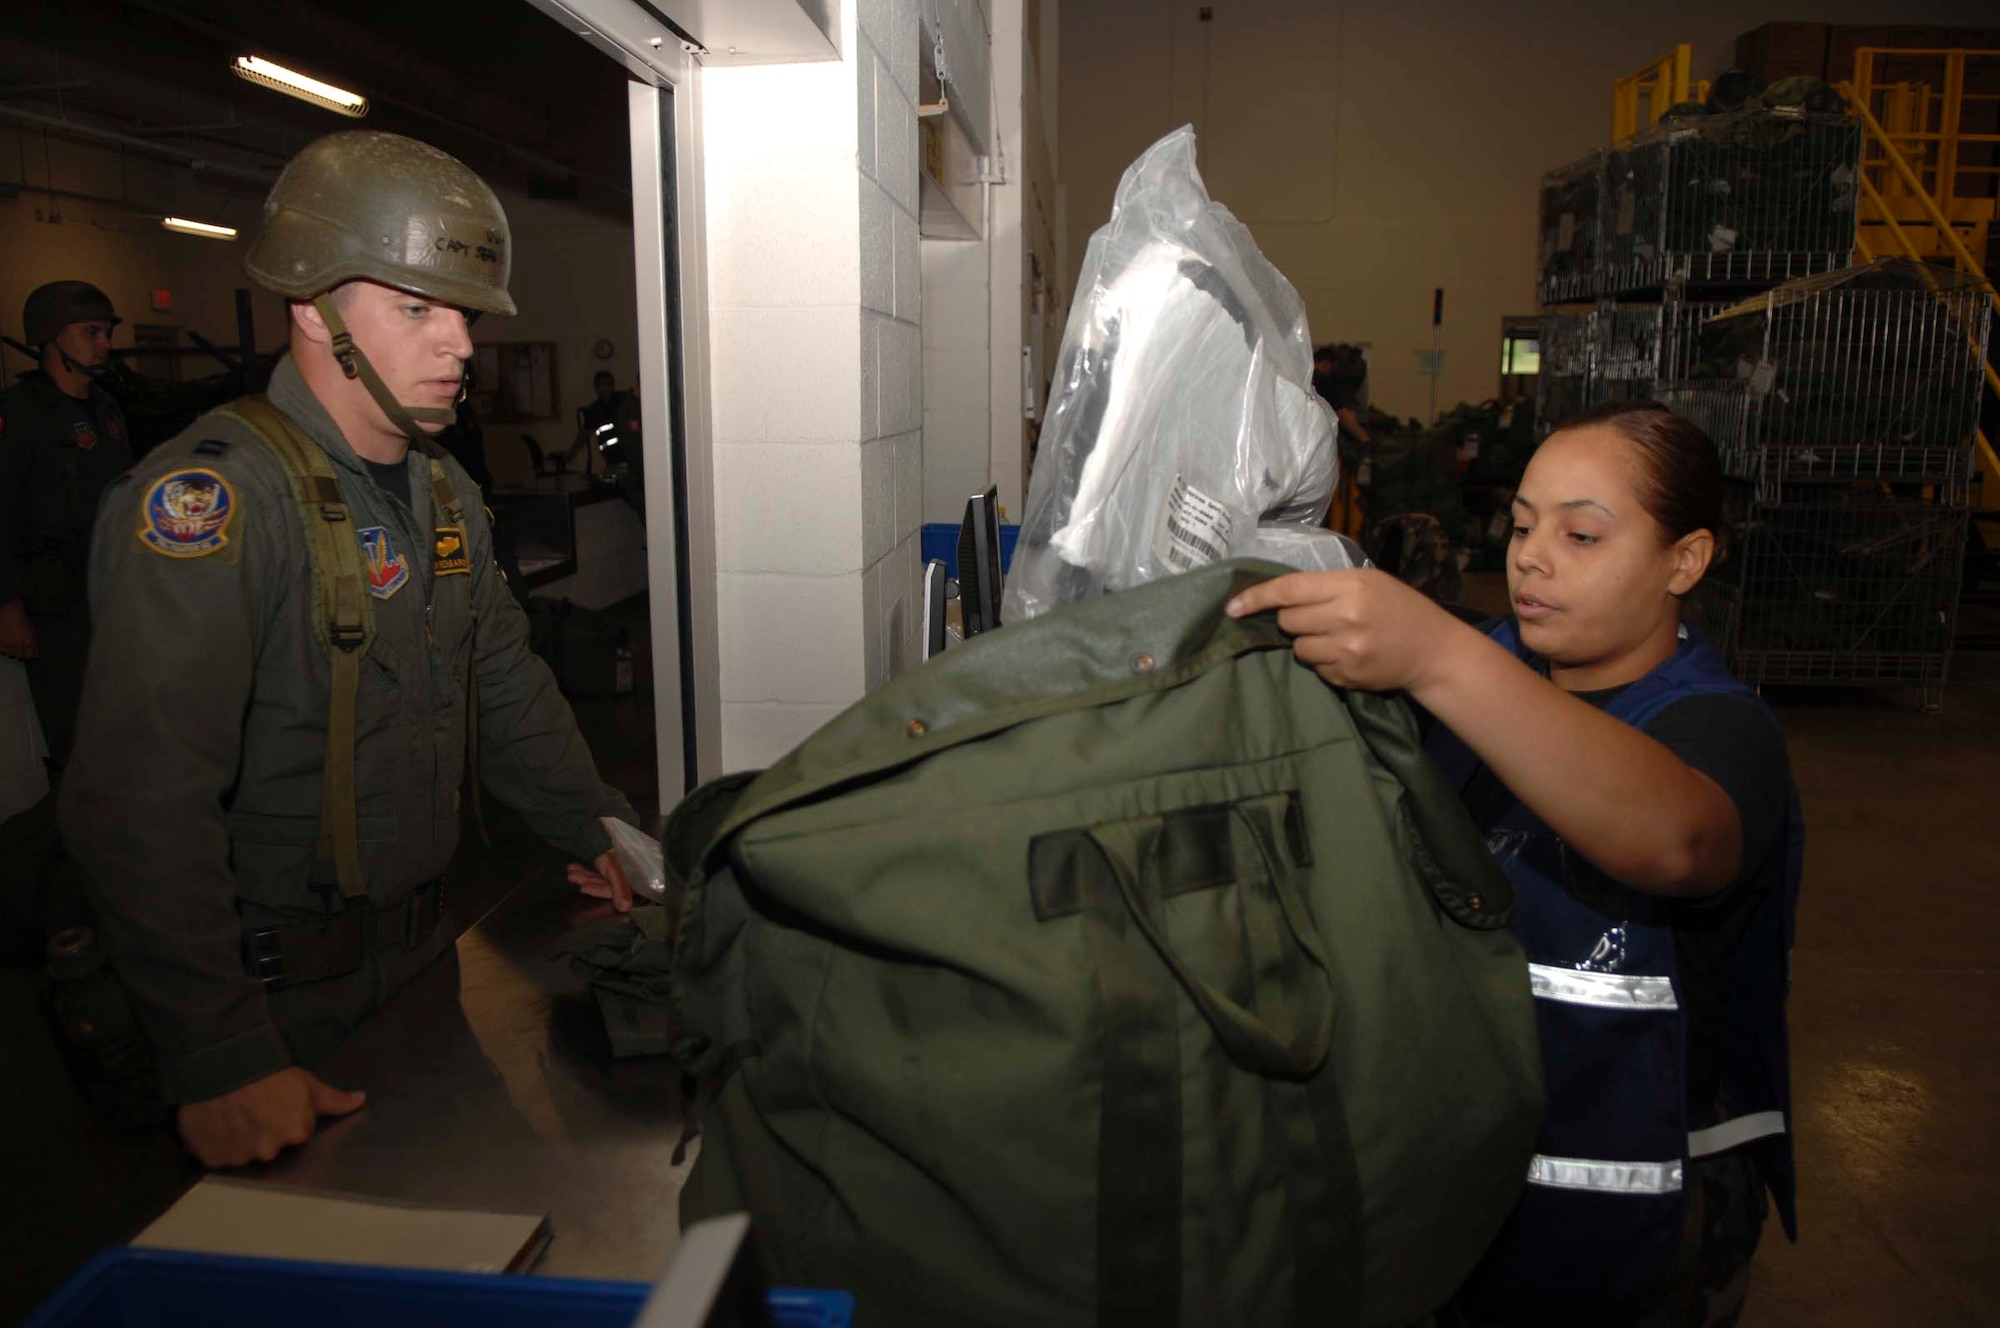 SHAW AIR FORCE BASE, S.C. -- Airman 1st Class Ondina Flores, 20th Communications Squadron base information transfer center custodian, inspects a mobility bag ensuring the proper chemical warfare gear is accounted for before issuing it to Capt. Sean Renbarger, 79th Fighter Squadron F-16CJ pilot, at the Chandler Deployment Processing Center during an Operational Readiness Inspection Aug. 6. The ORI validates the expeditionary skill set of the 20th FW. (U.S. Air Force photo/Staff Sgt. Nathan Bevier)